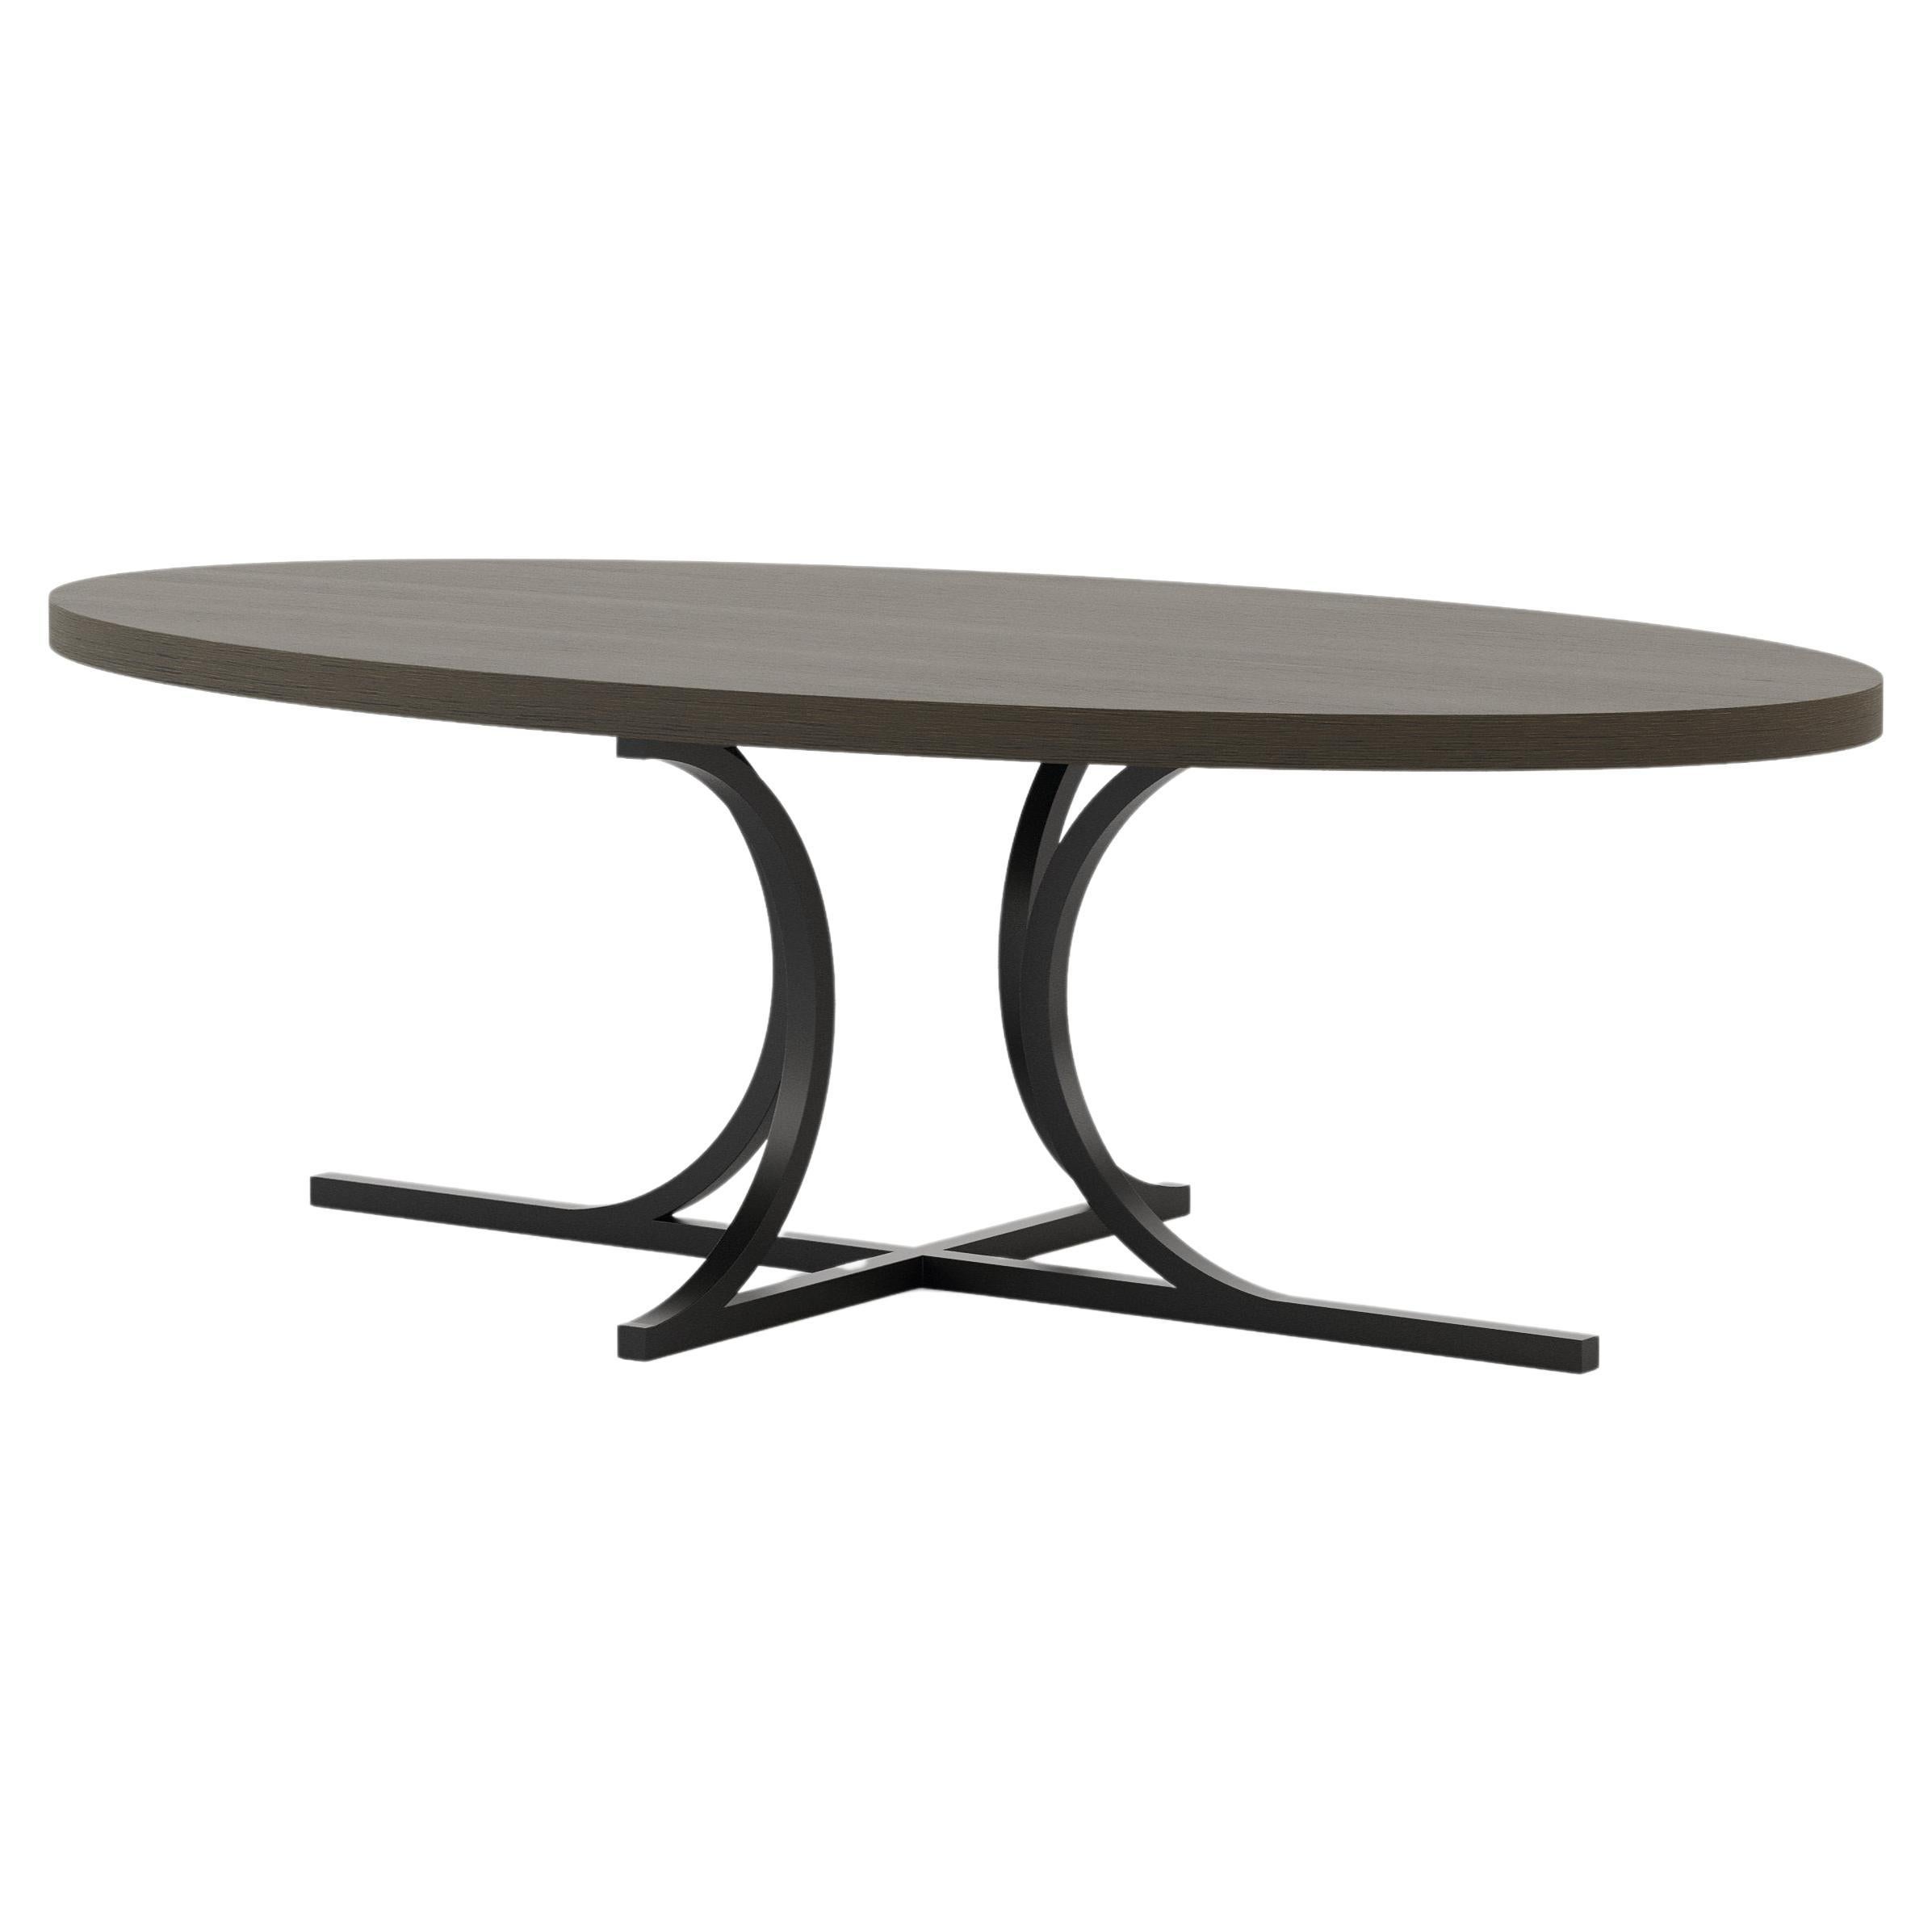 Modern Bridge Dining Table Made with Walnut and Iron, Handmade by Stylish Club For Sale